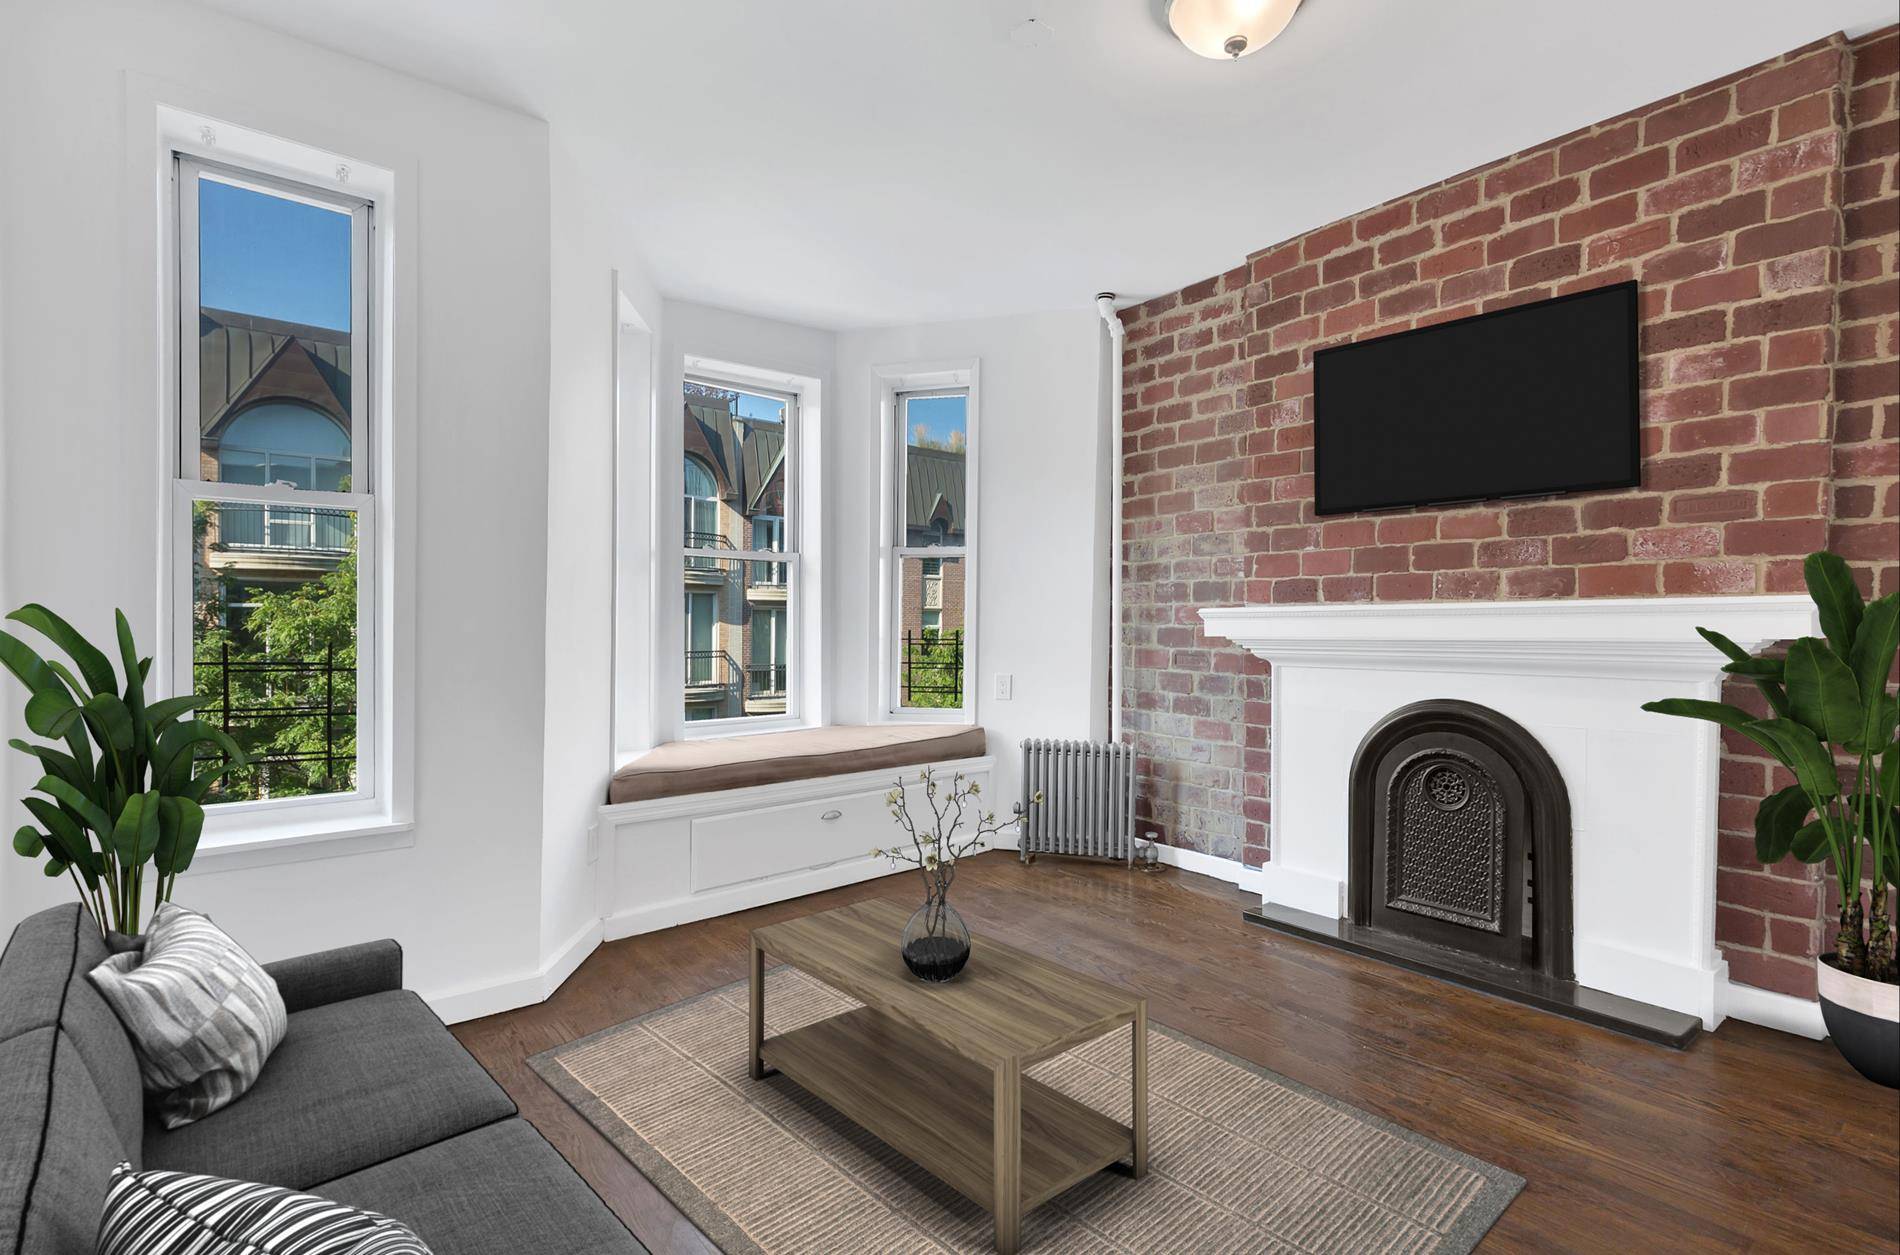 JUST LISTED ! Charming Pre War Condo in Prime Park Slope.